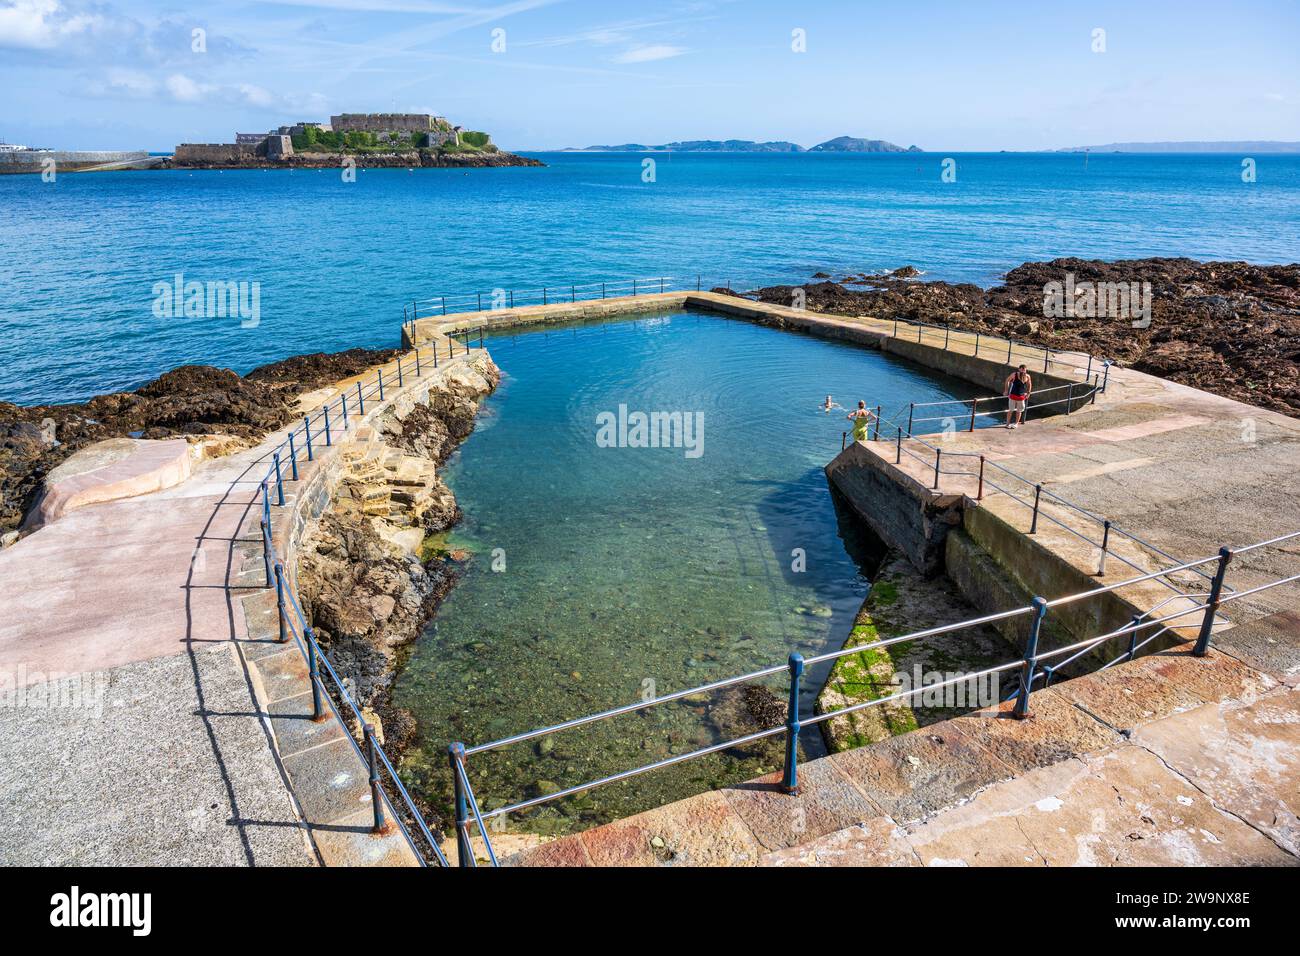 La Vallette Gent's Outdoor swimming pool, with Castle Cornet in distance, in St Peter Port, Guernsey, Channel Islands Stock Photo